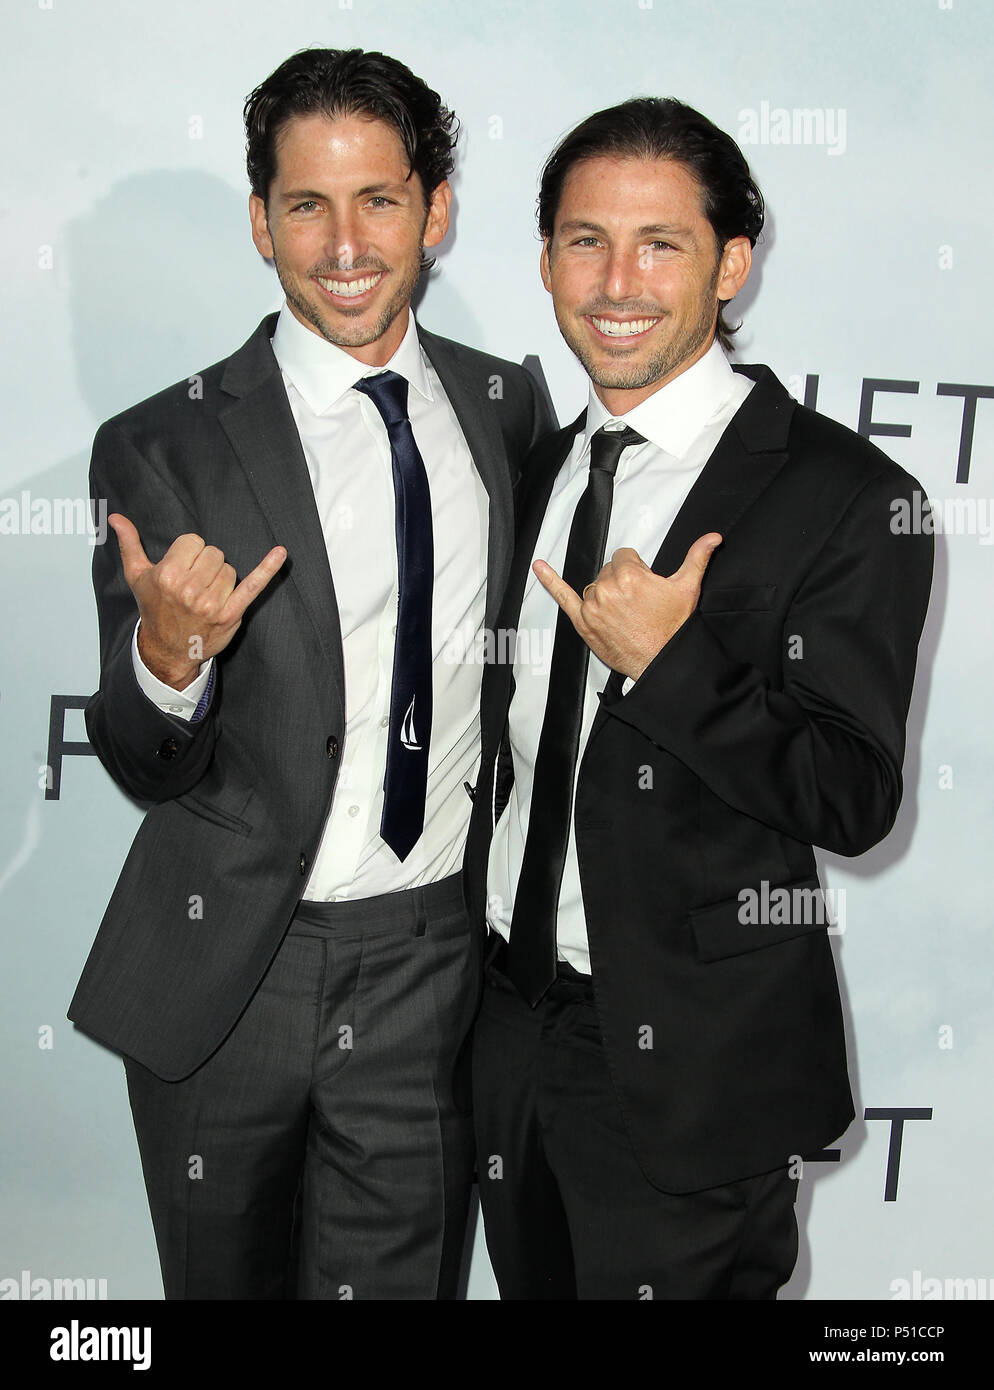 “Adrift” Los Angeles Premiere held the Regal L.A. Life Theatre in Los Angeles, California.  Featuring: Aaron Kandell, Jordan Kandell Where: Los Angeles, California, United States When: 24 May 2018 Credit: Adriana M. Barraza/WENN.com Stock Photo